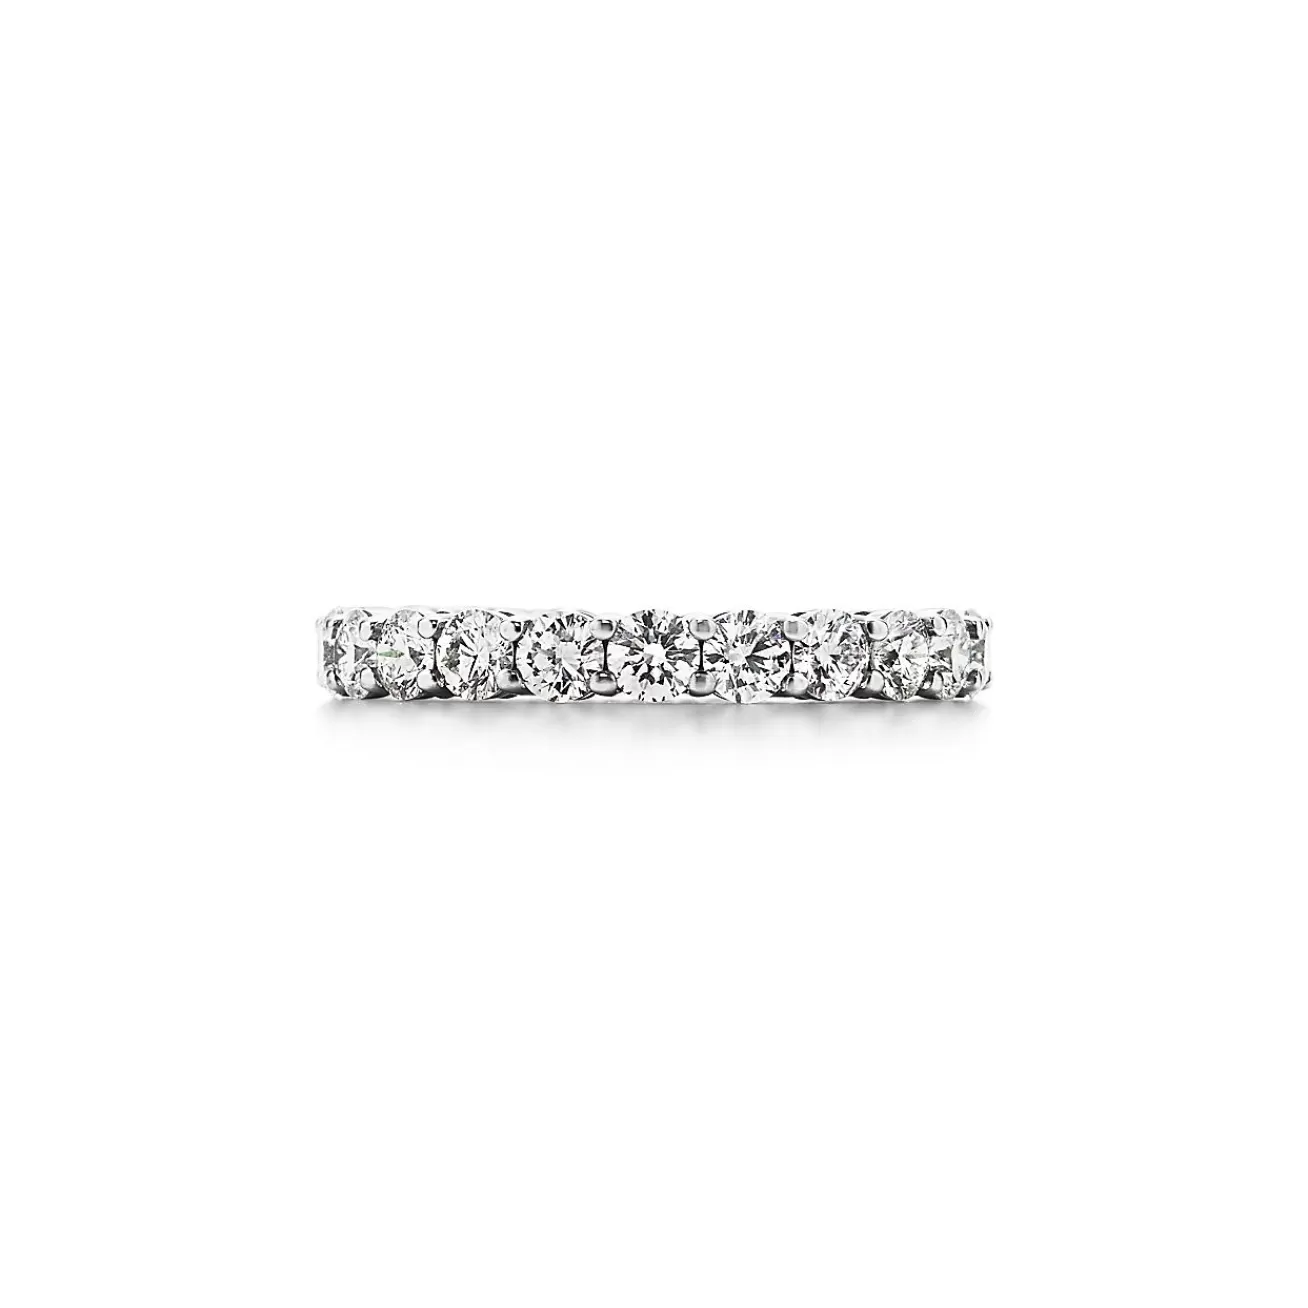 Tiffany & Co. Tiffany Forever Band Ring in Platinum with a Full Circle of Diamonds, 3 mm Wide | ^Women Rings | Platinum Jewelry